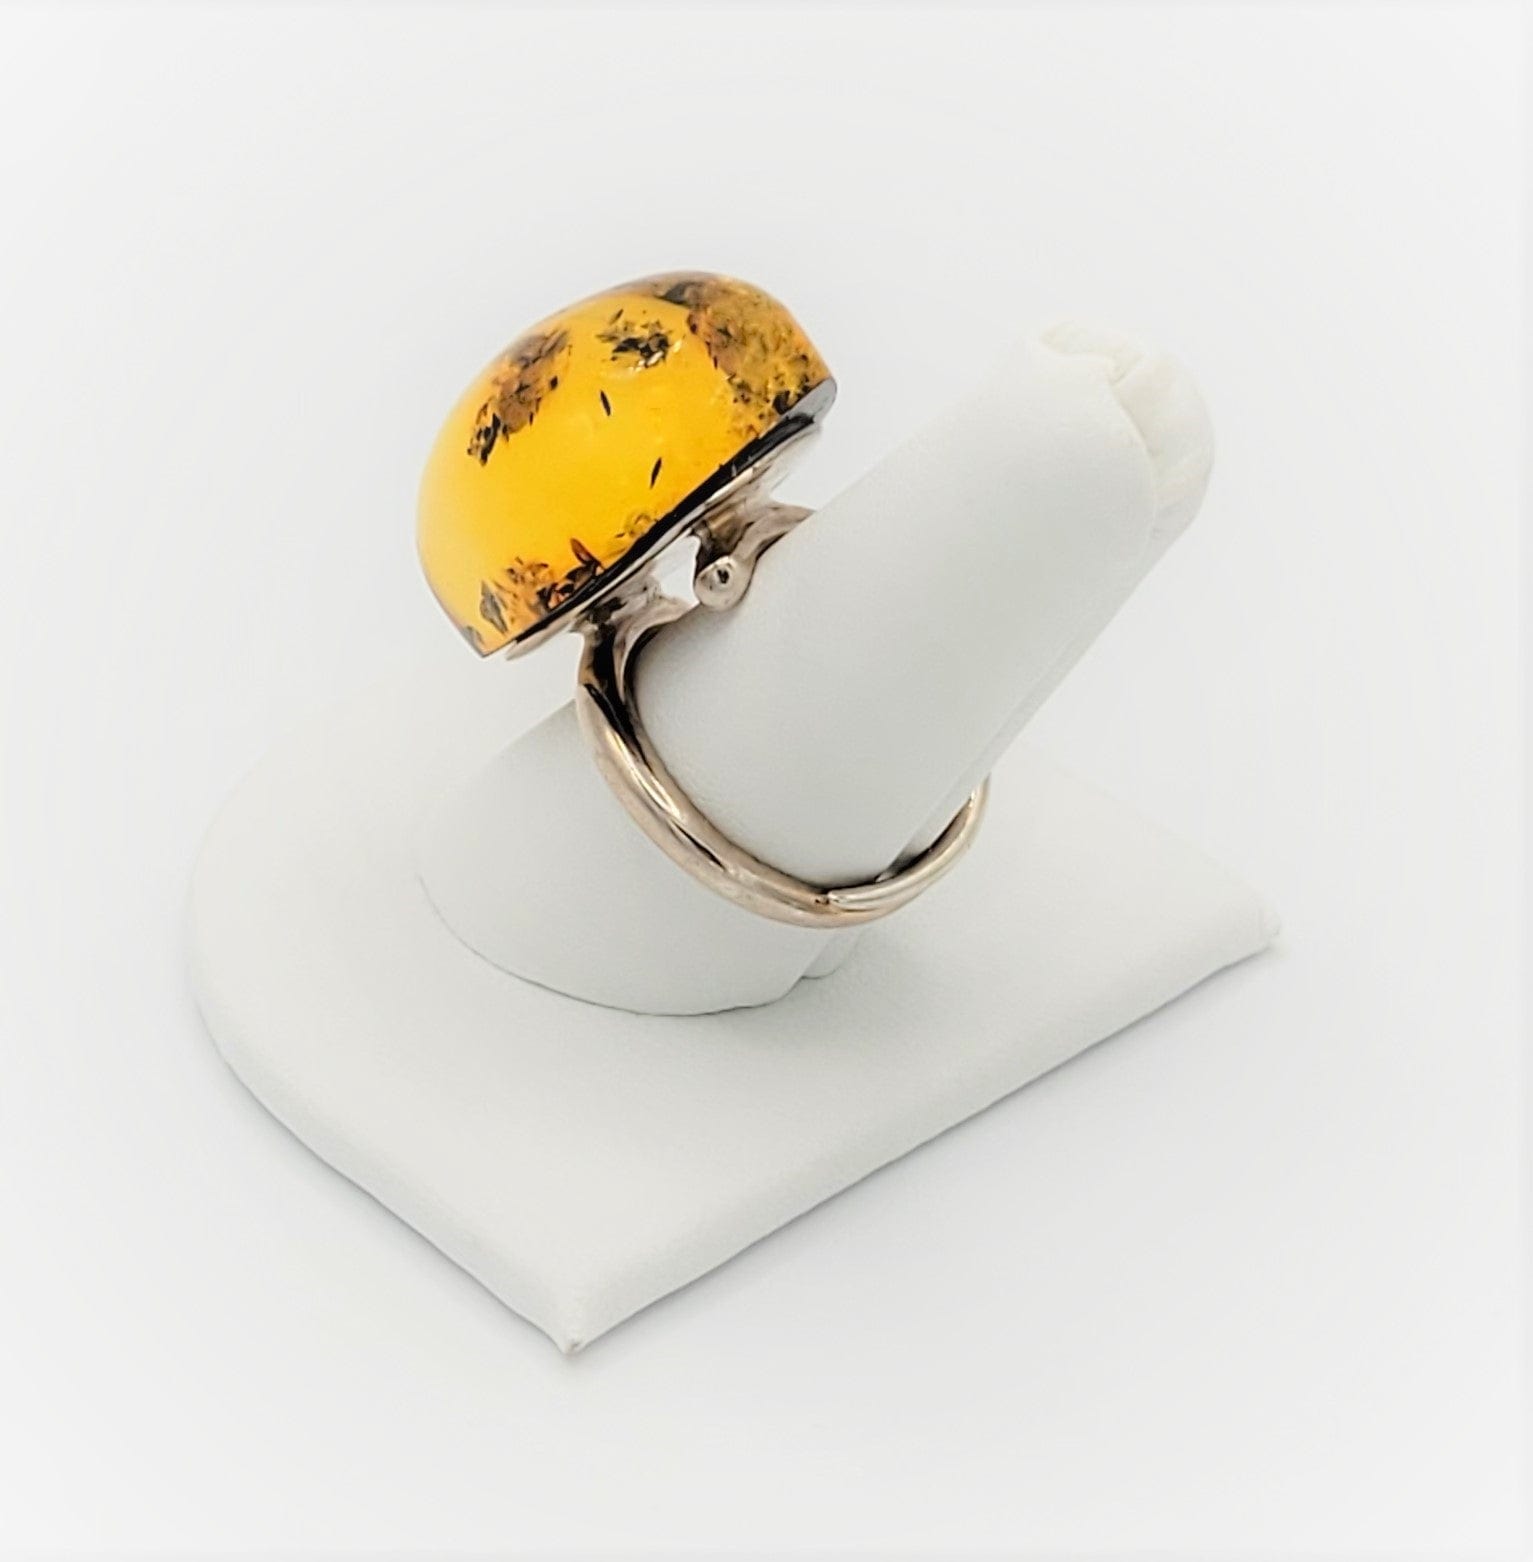 Amber Ring Jewelry Vintage Sterling Silver Giant Modernist Pear Shaped Amber Cocktail Statement Ring